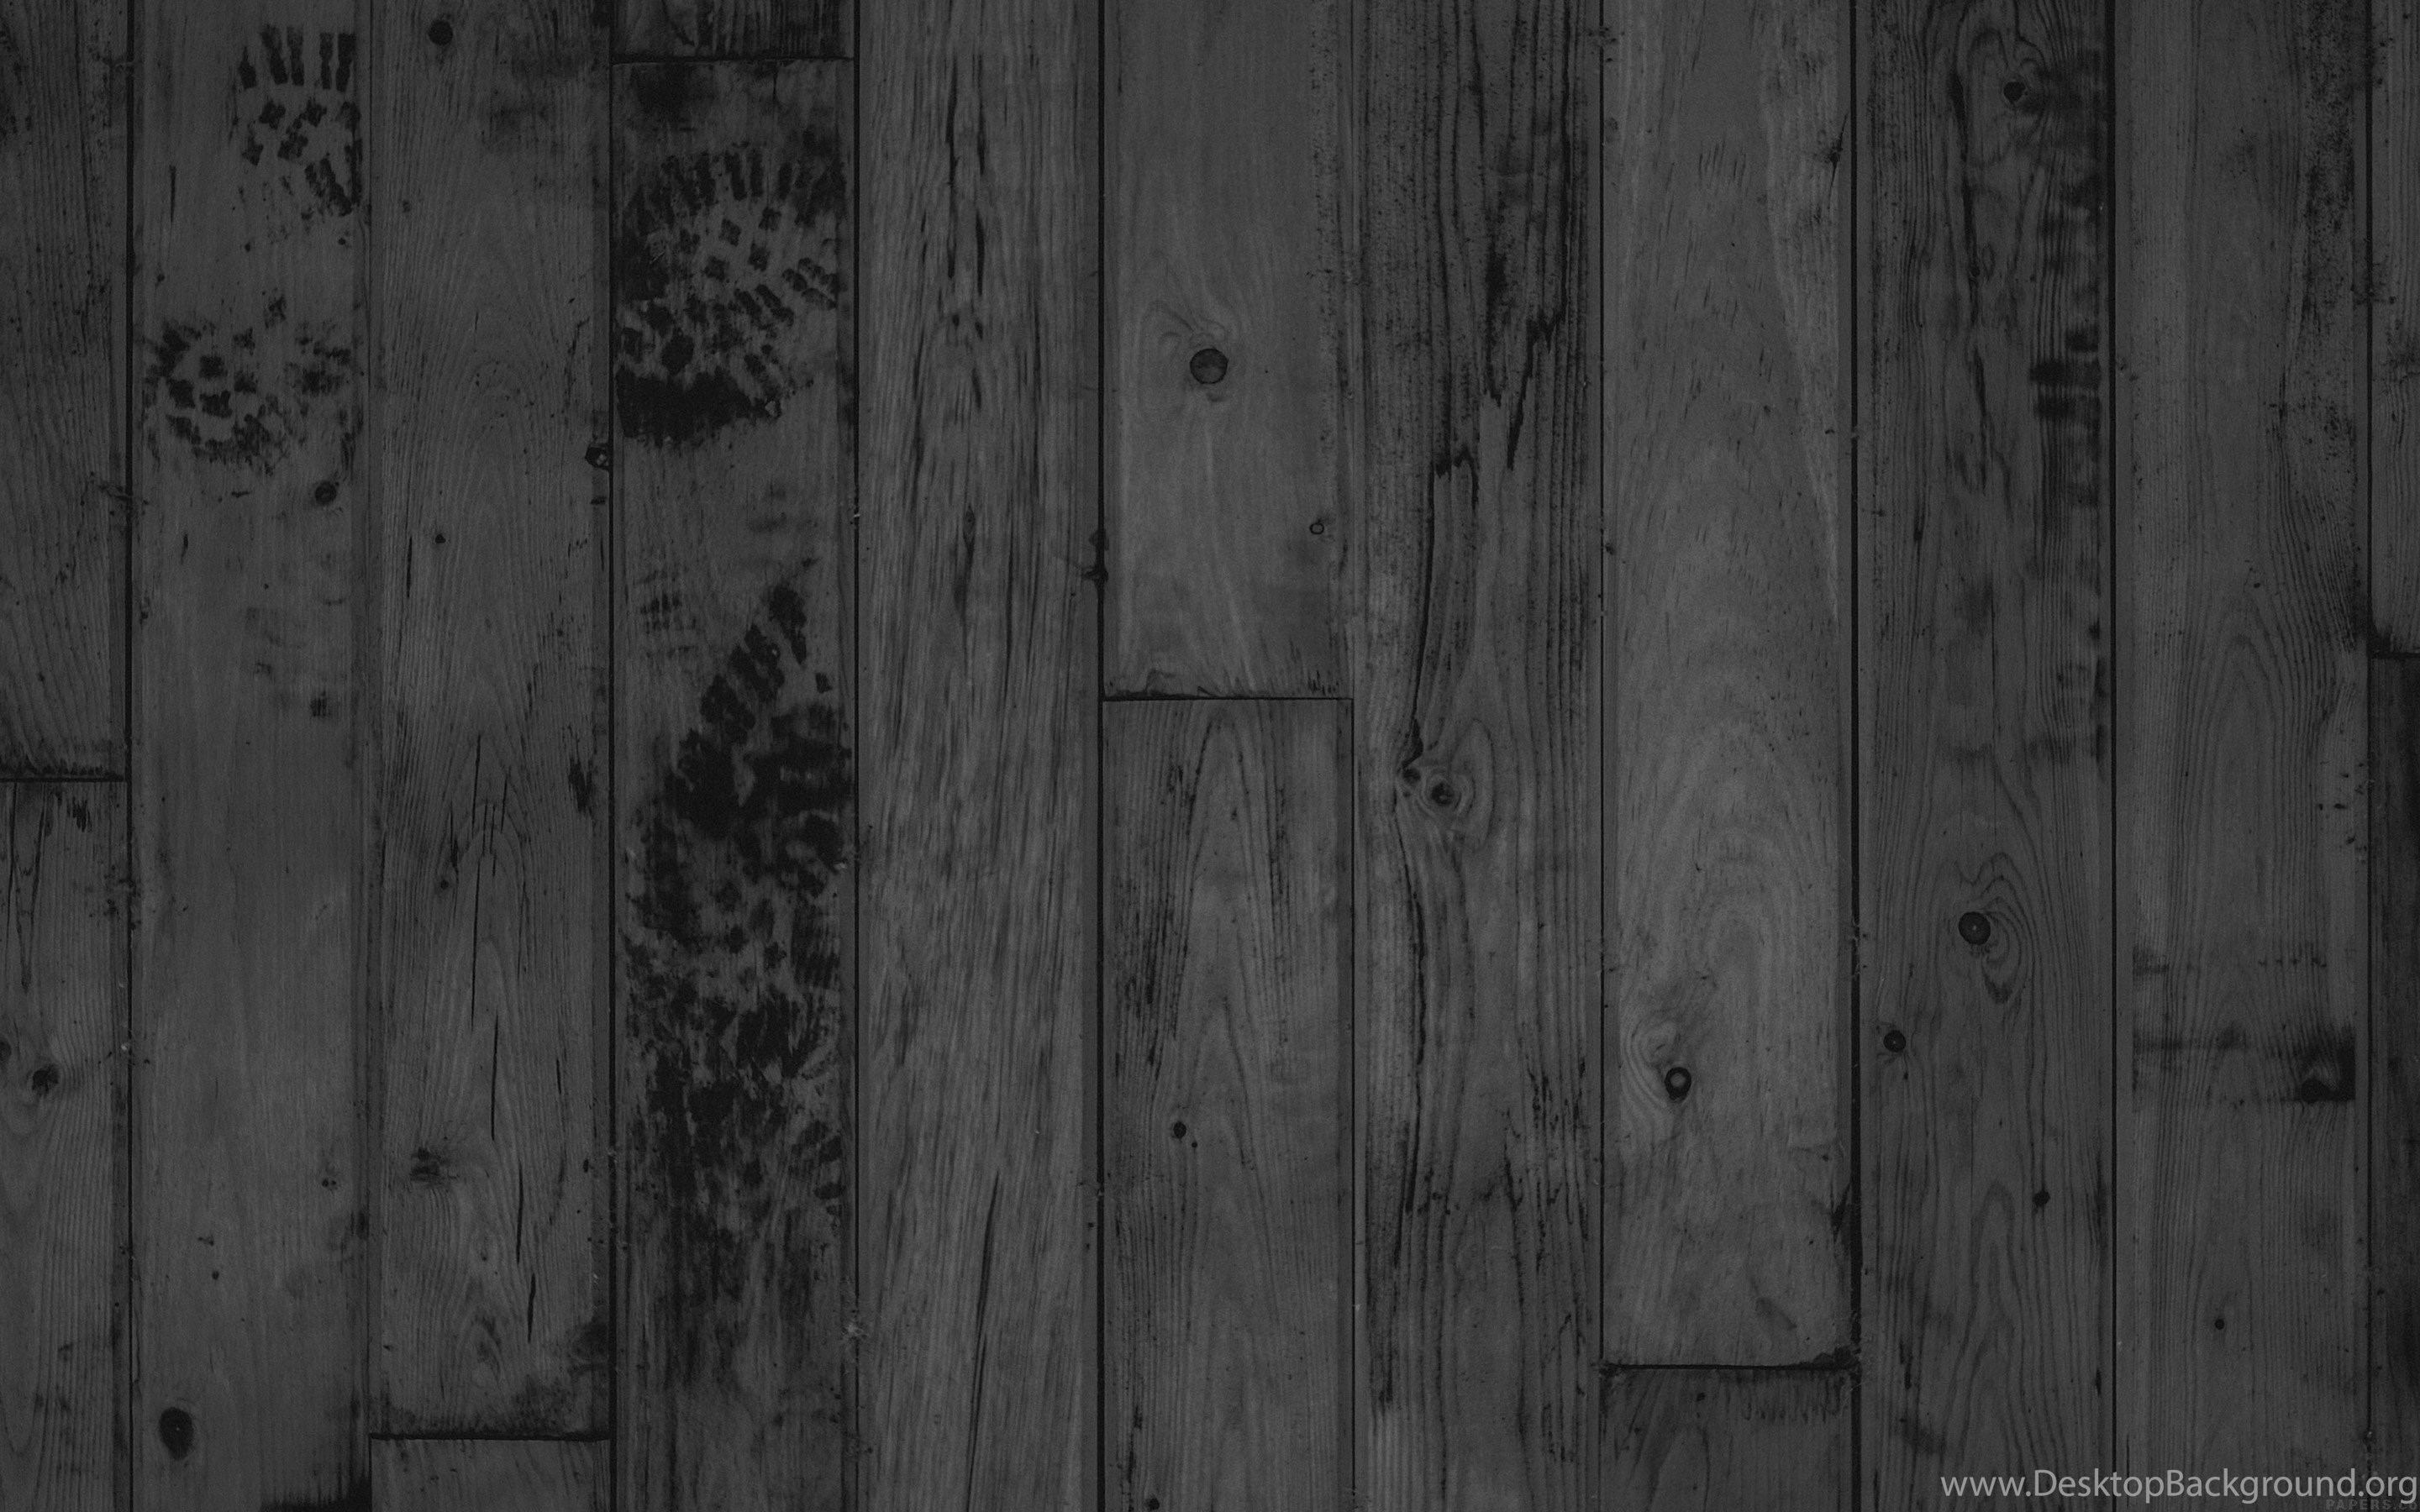 Wood Stock Pattern Nature Bw Wallpapers Desktop Background Images, Photos, Reviews